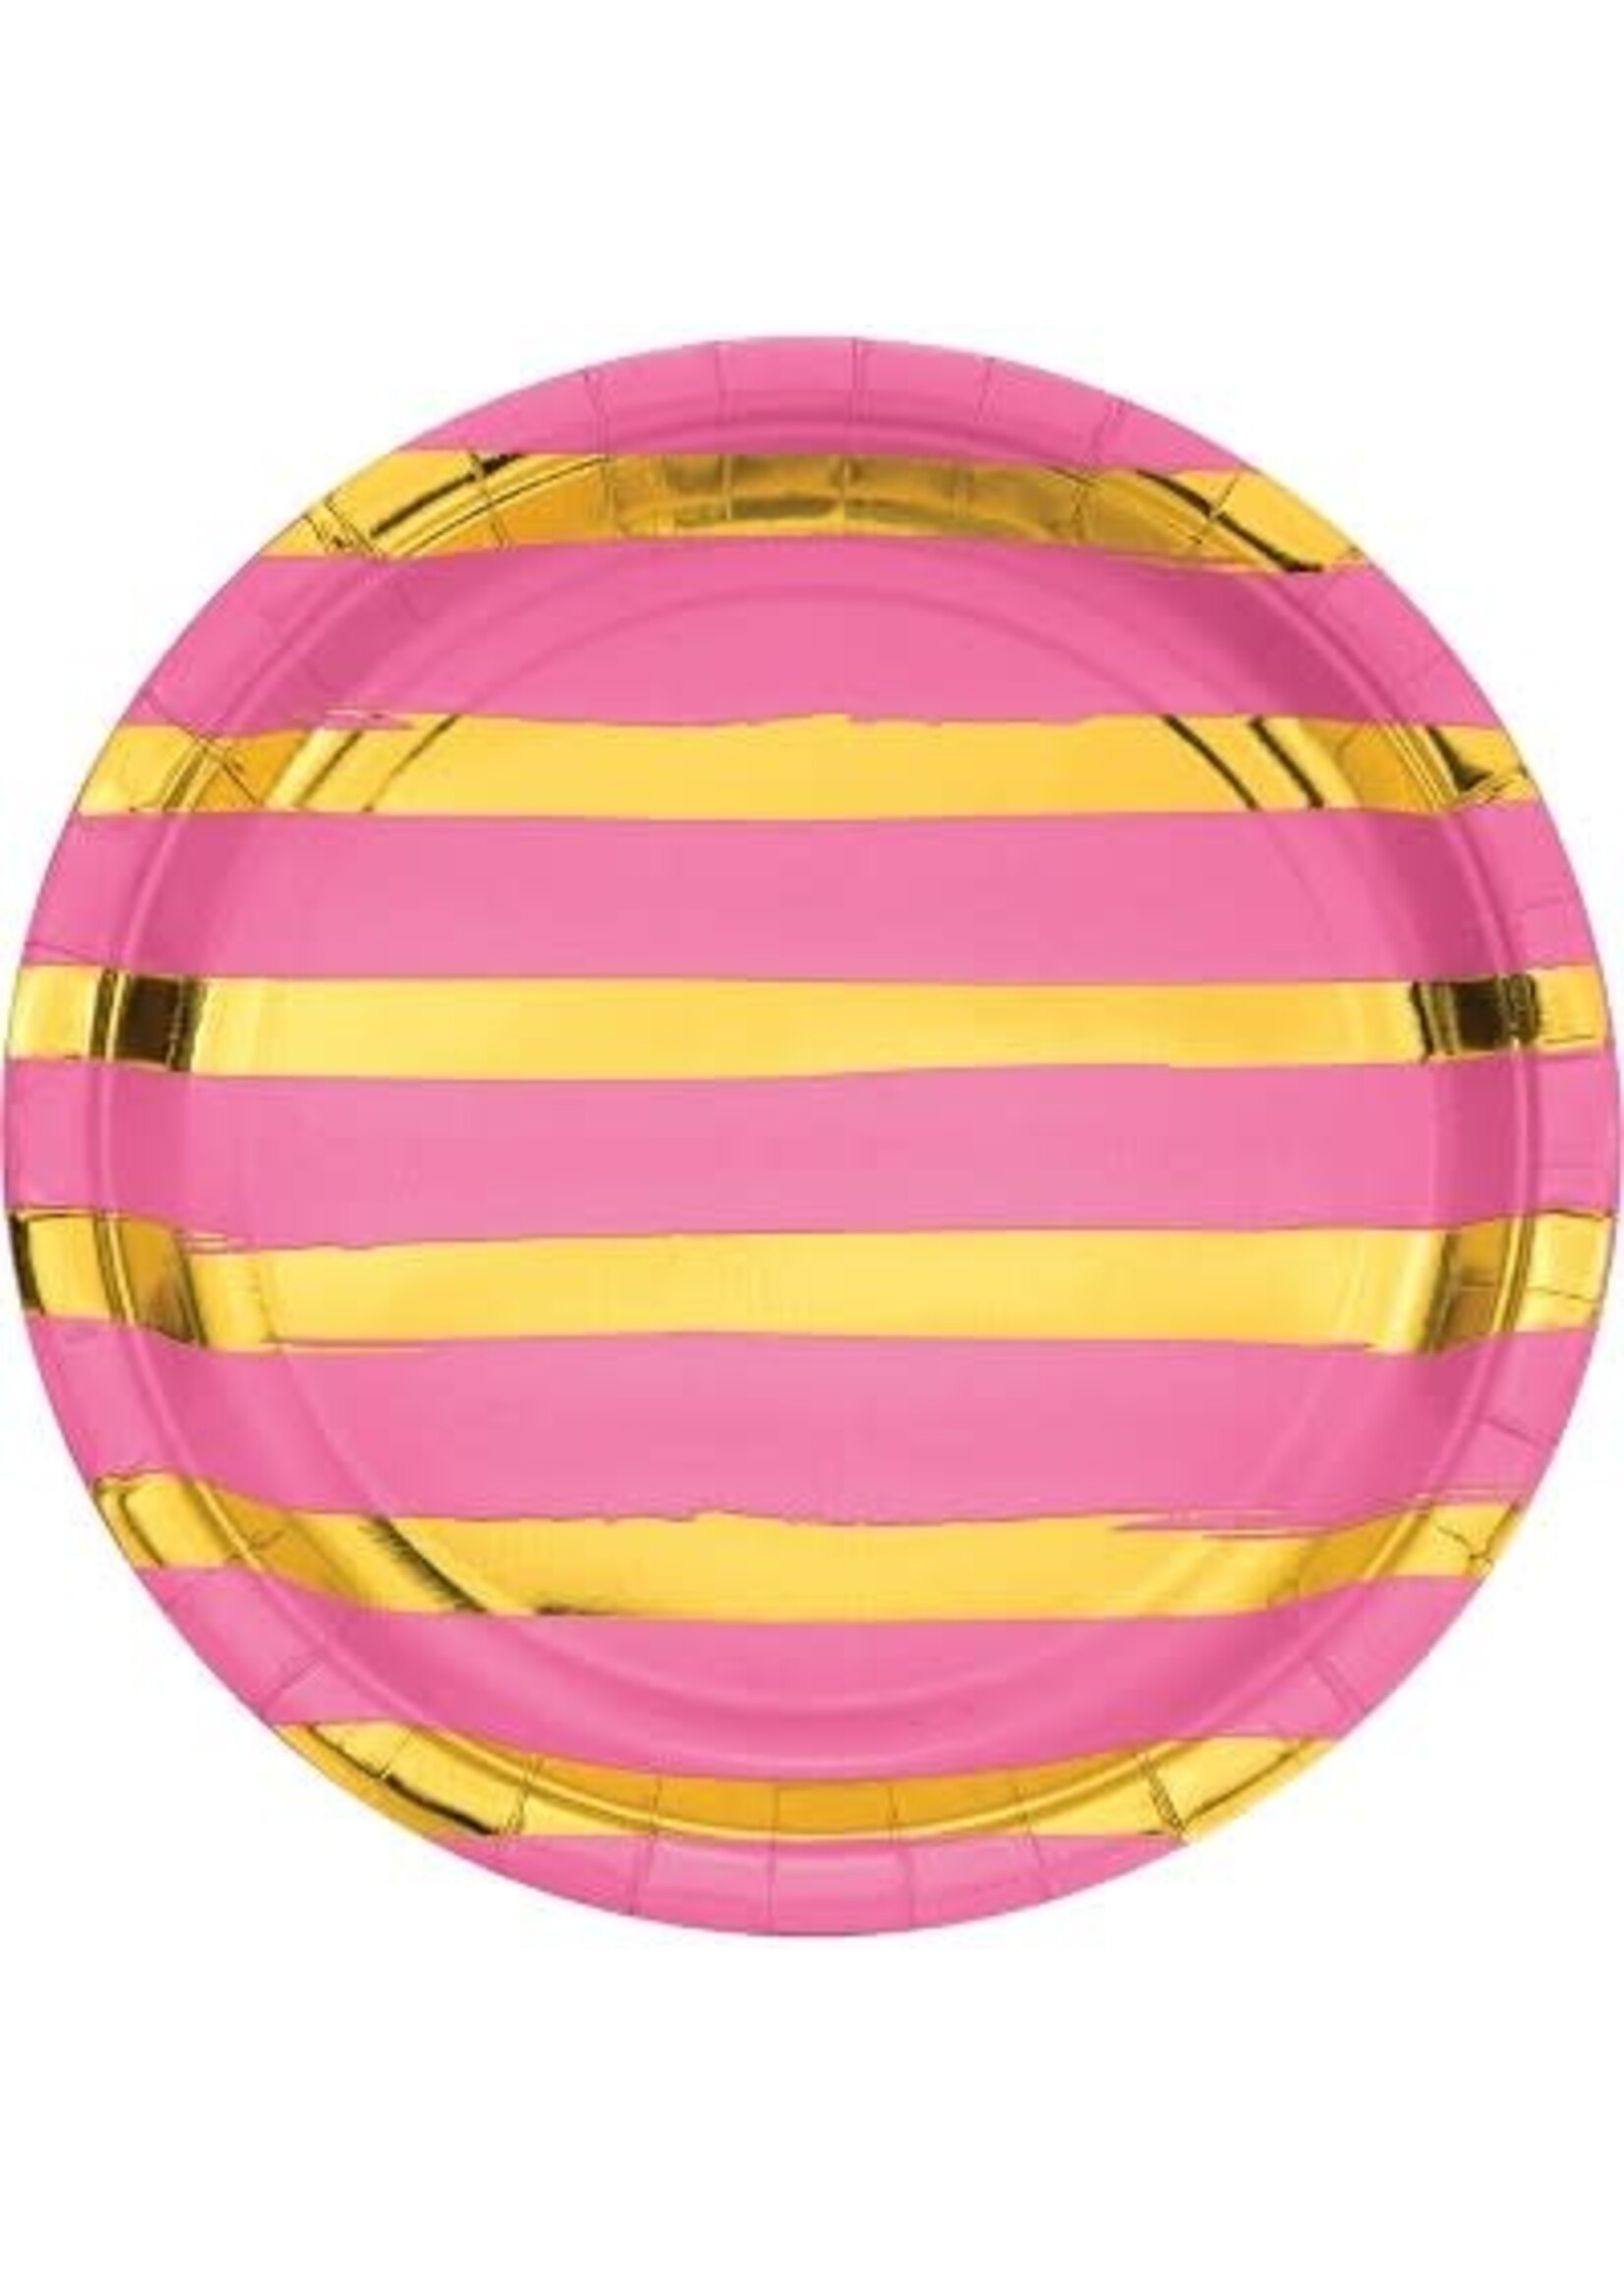 PLT9IN FOIL 8CT CANDY PINK